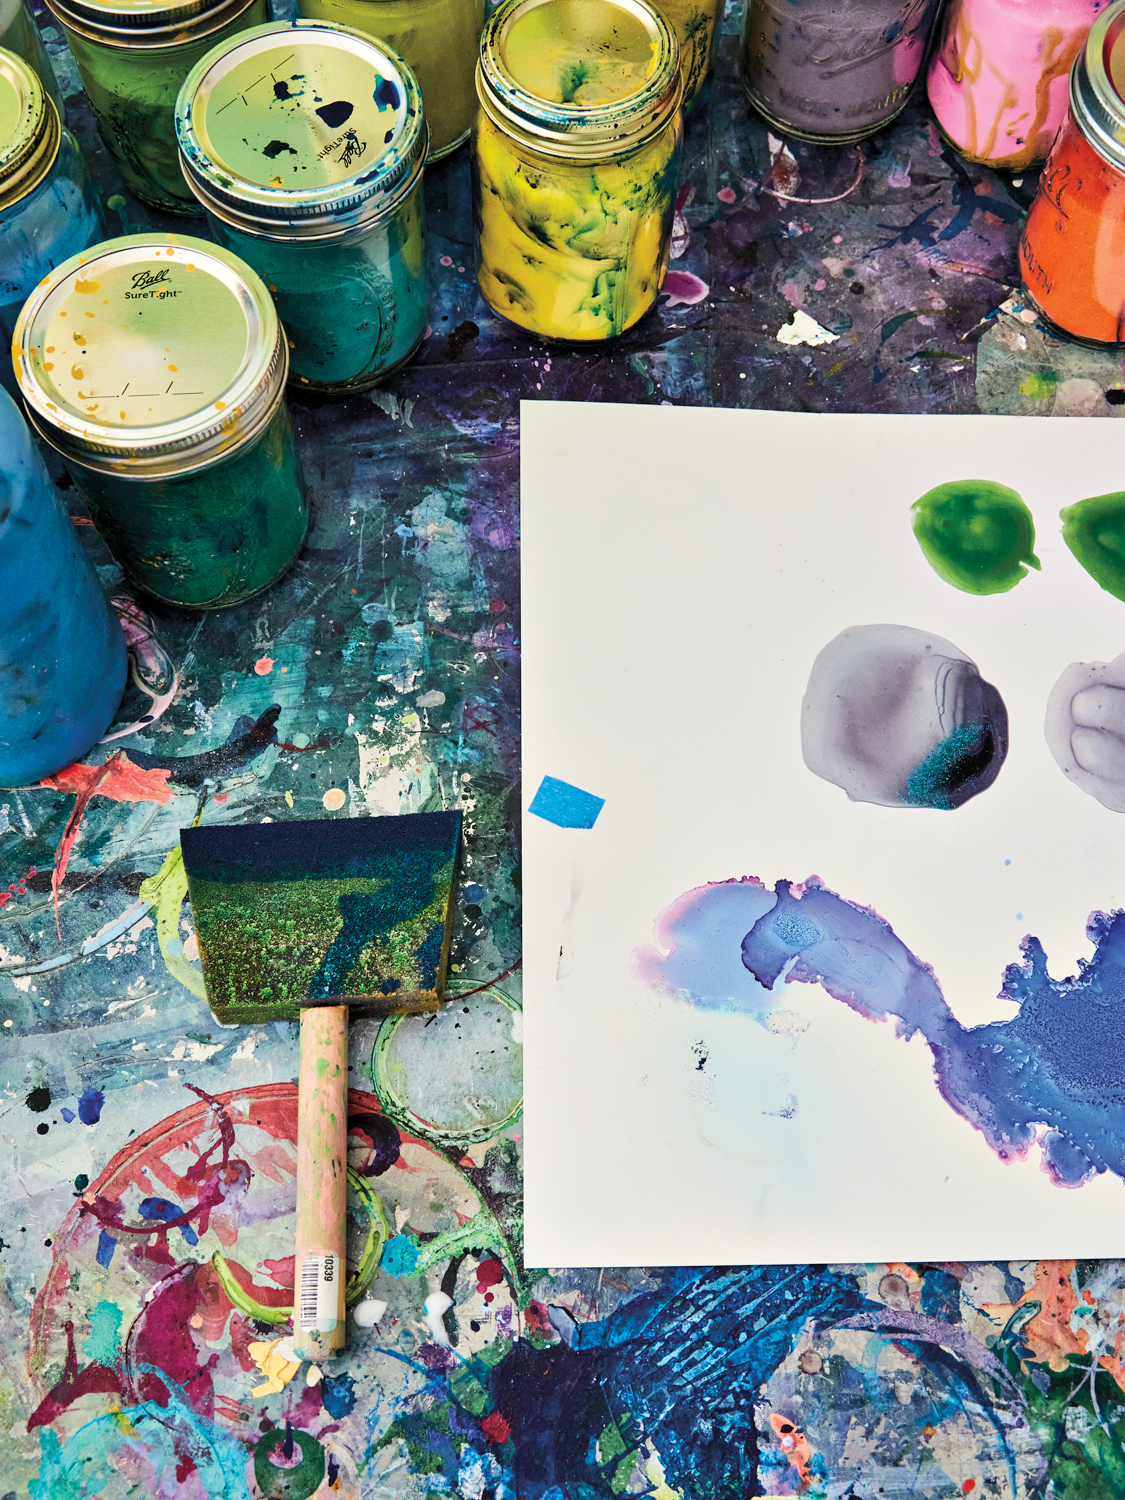 A work table splattered with paint